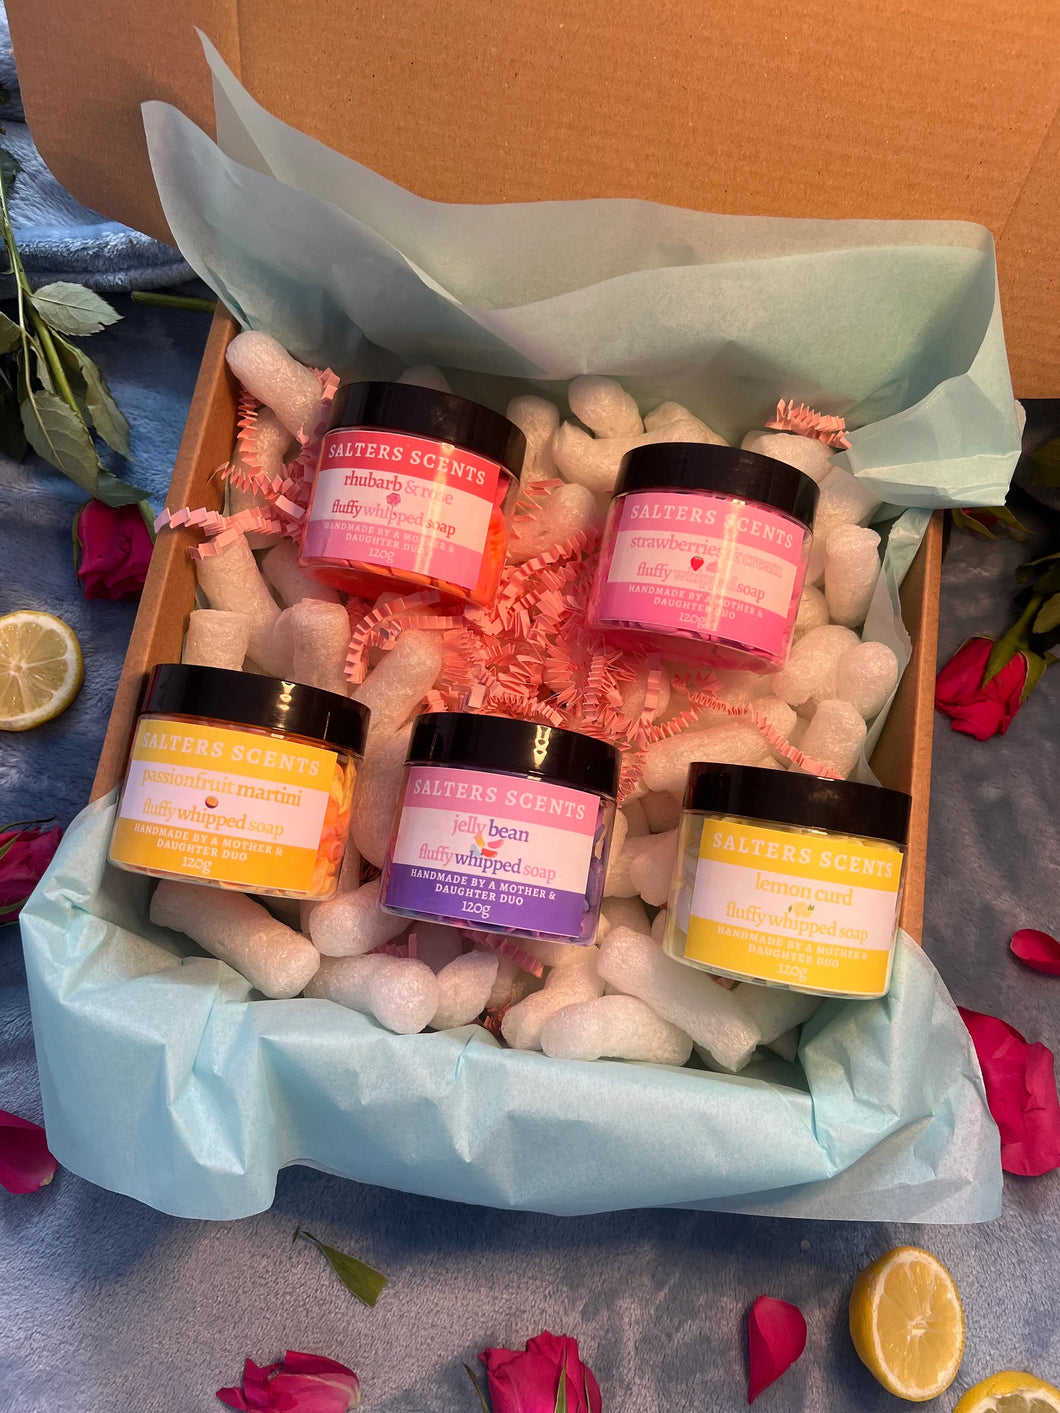 5 x 120g Sweet Whipped Body Soap, Strawberries & Cream, Lemon Curd, Passionfruit Martini, Jelly Bean, Rhubarb and Rose